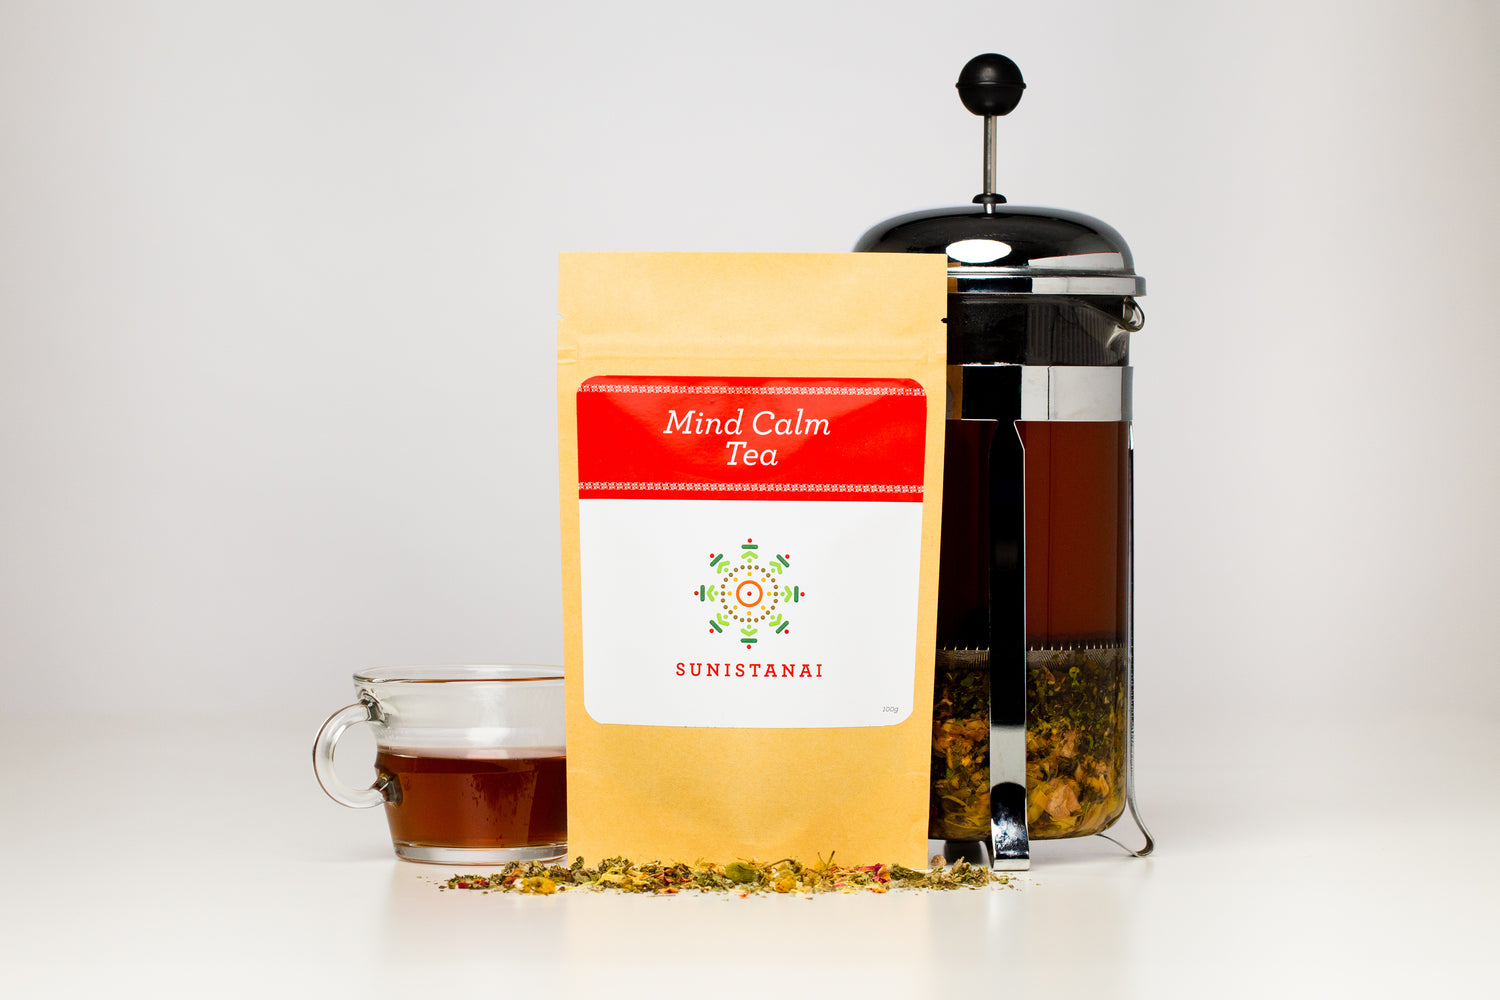 Mind Calm Tea has been handcrafted to support immunity and prioritize calming nerves while providing stress relief. This Ayurvedic Tea is non-caffeinated, herbal, immunity boosting, and releases tension in both the mind and body.